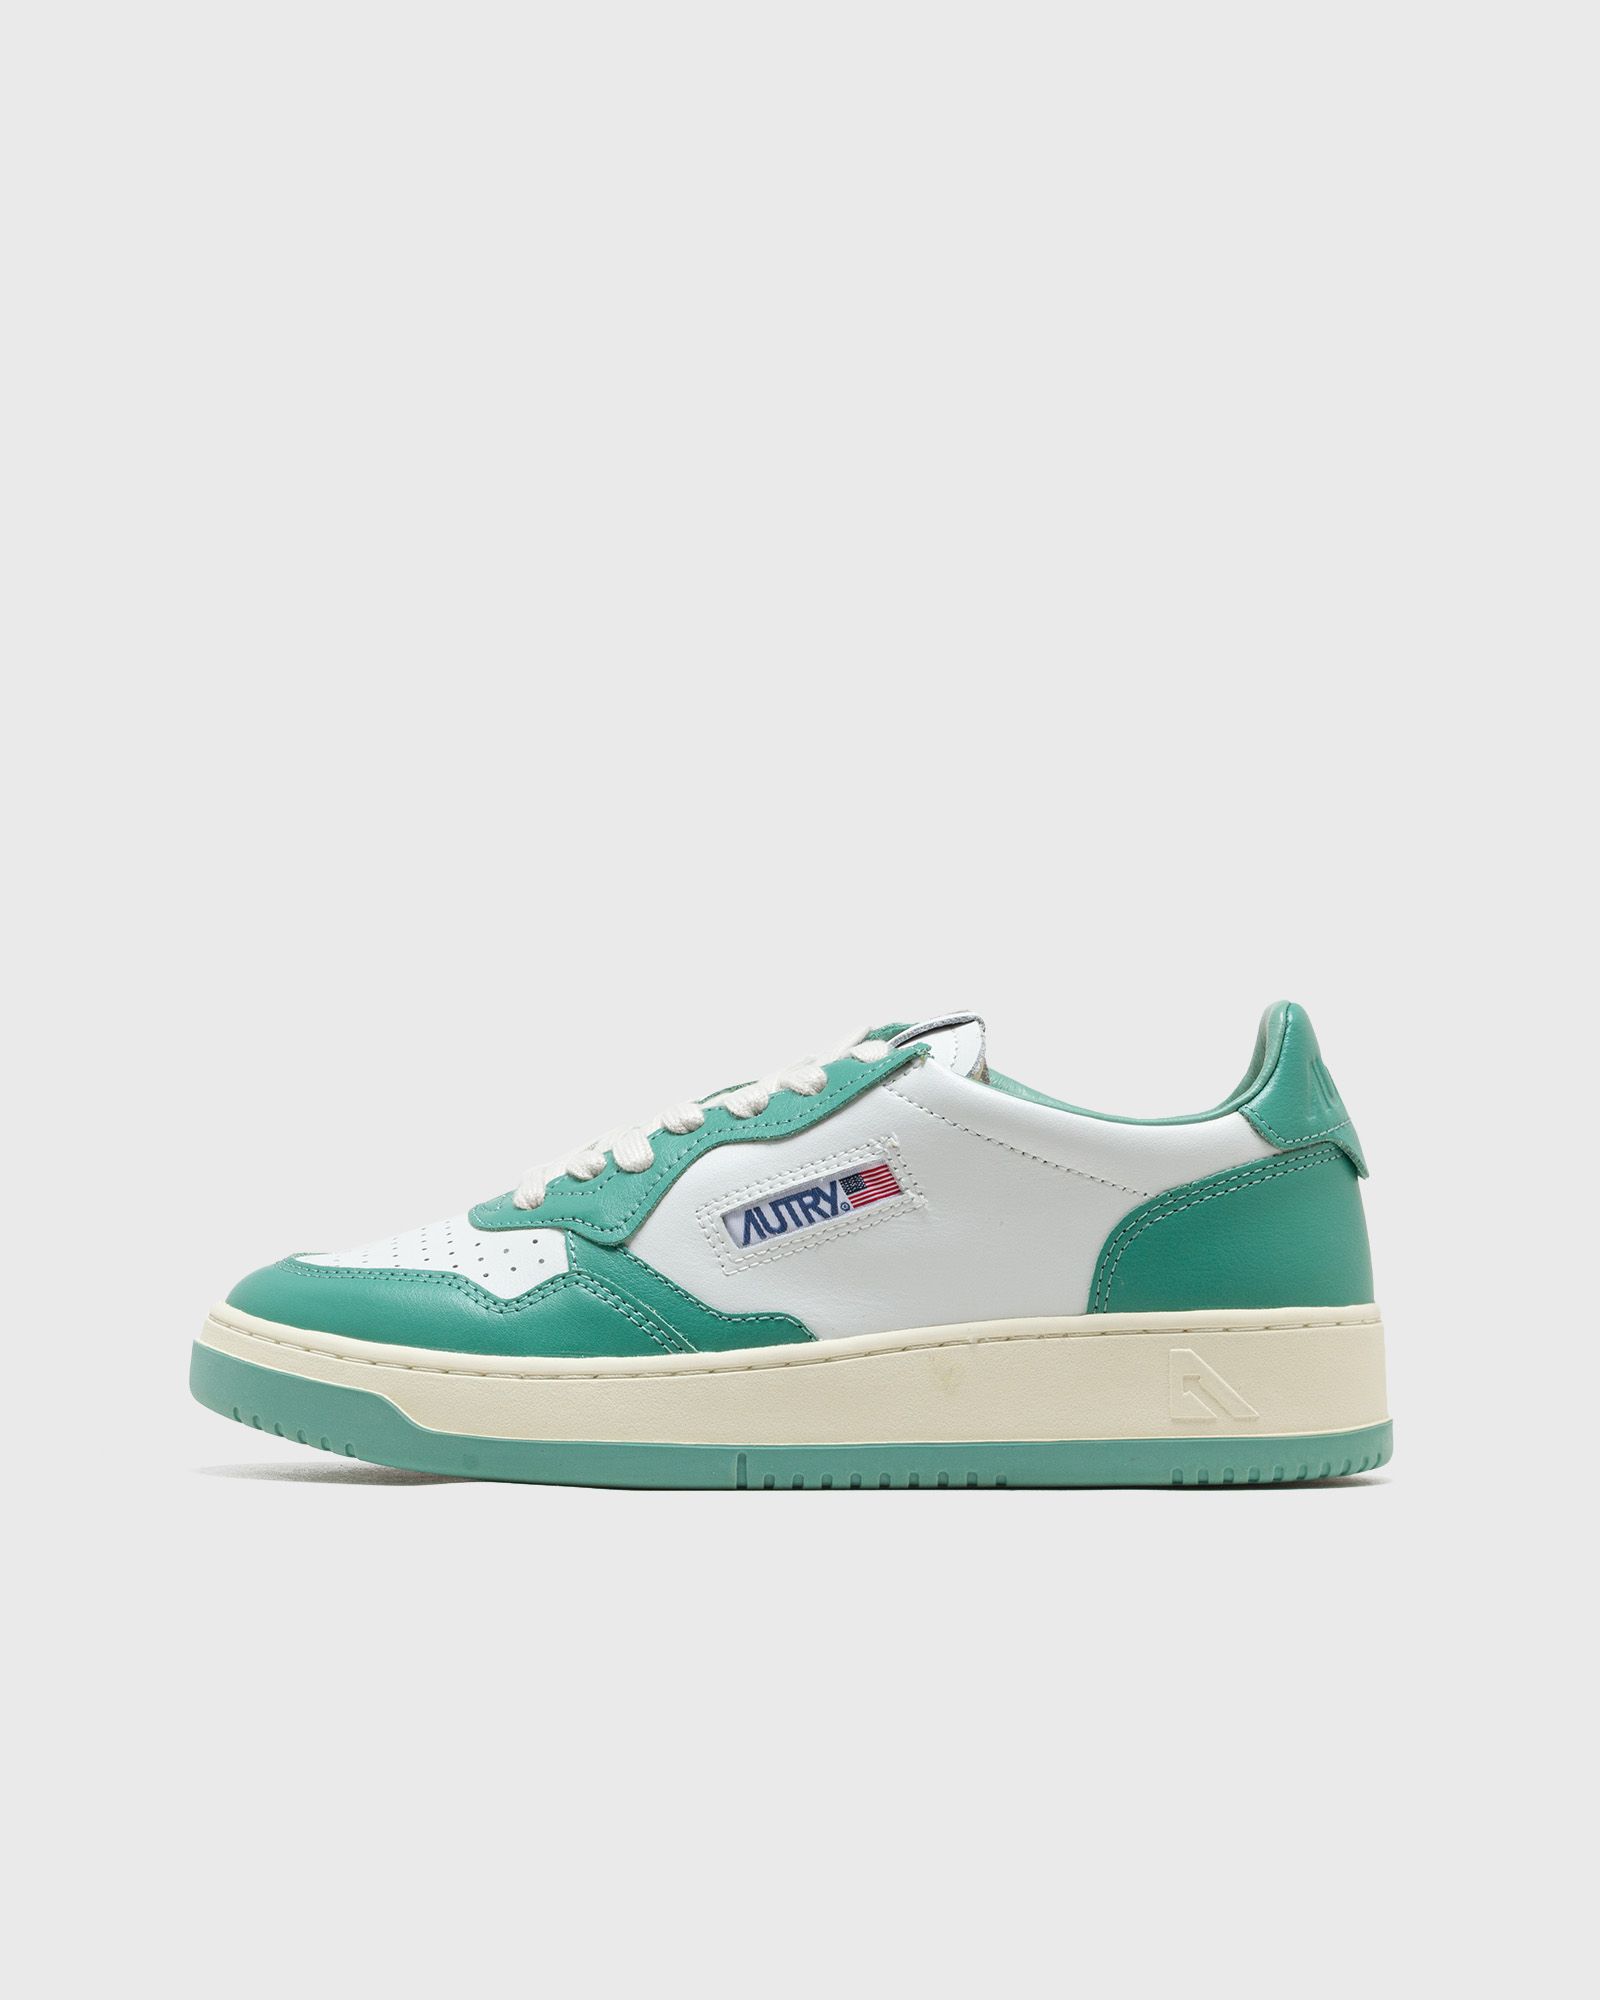 Autry Action Shoes WMNS MEDALIST LOW women Lowtop green|white in Größe:40 von Autry Action Shoes